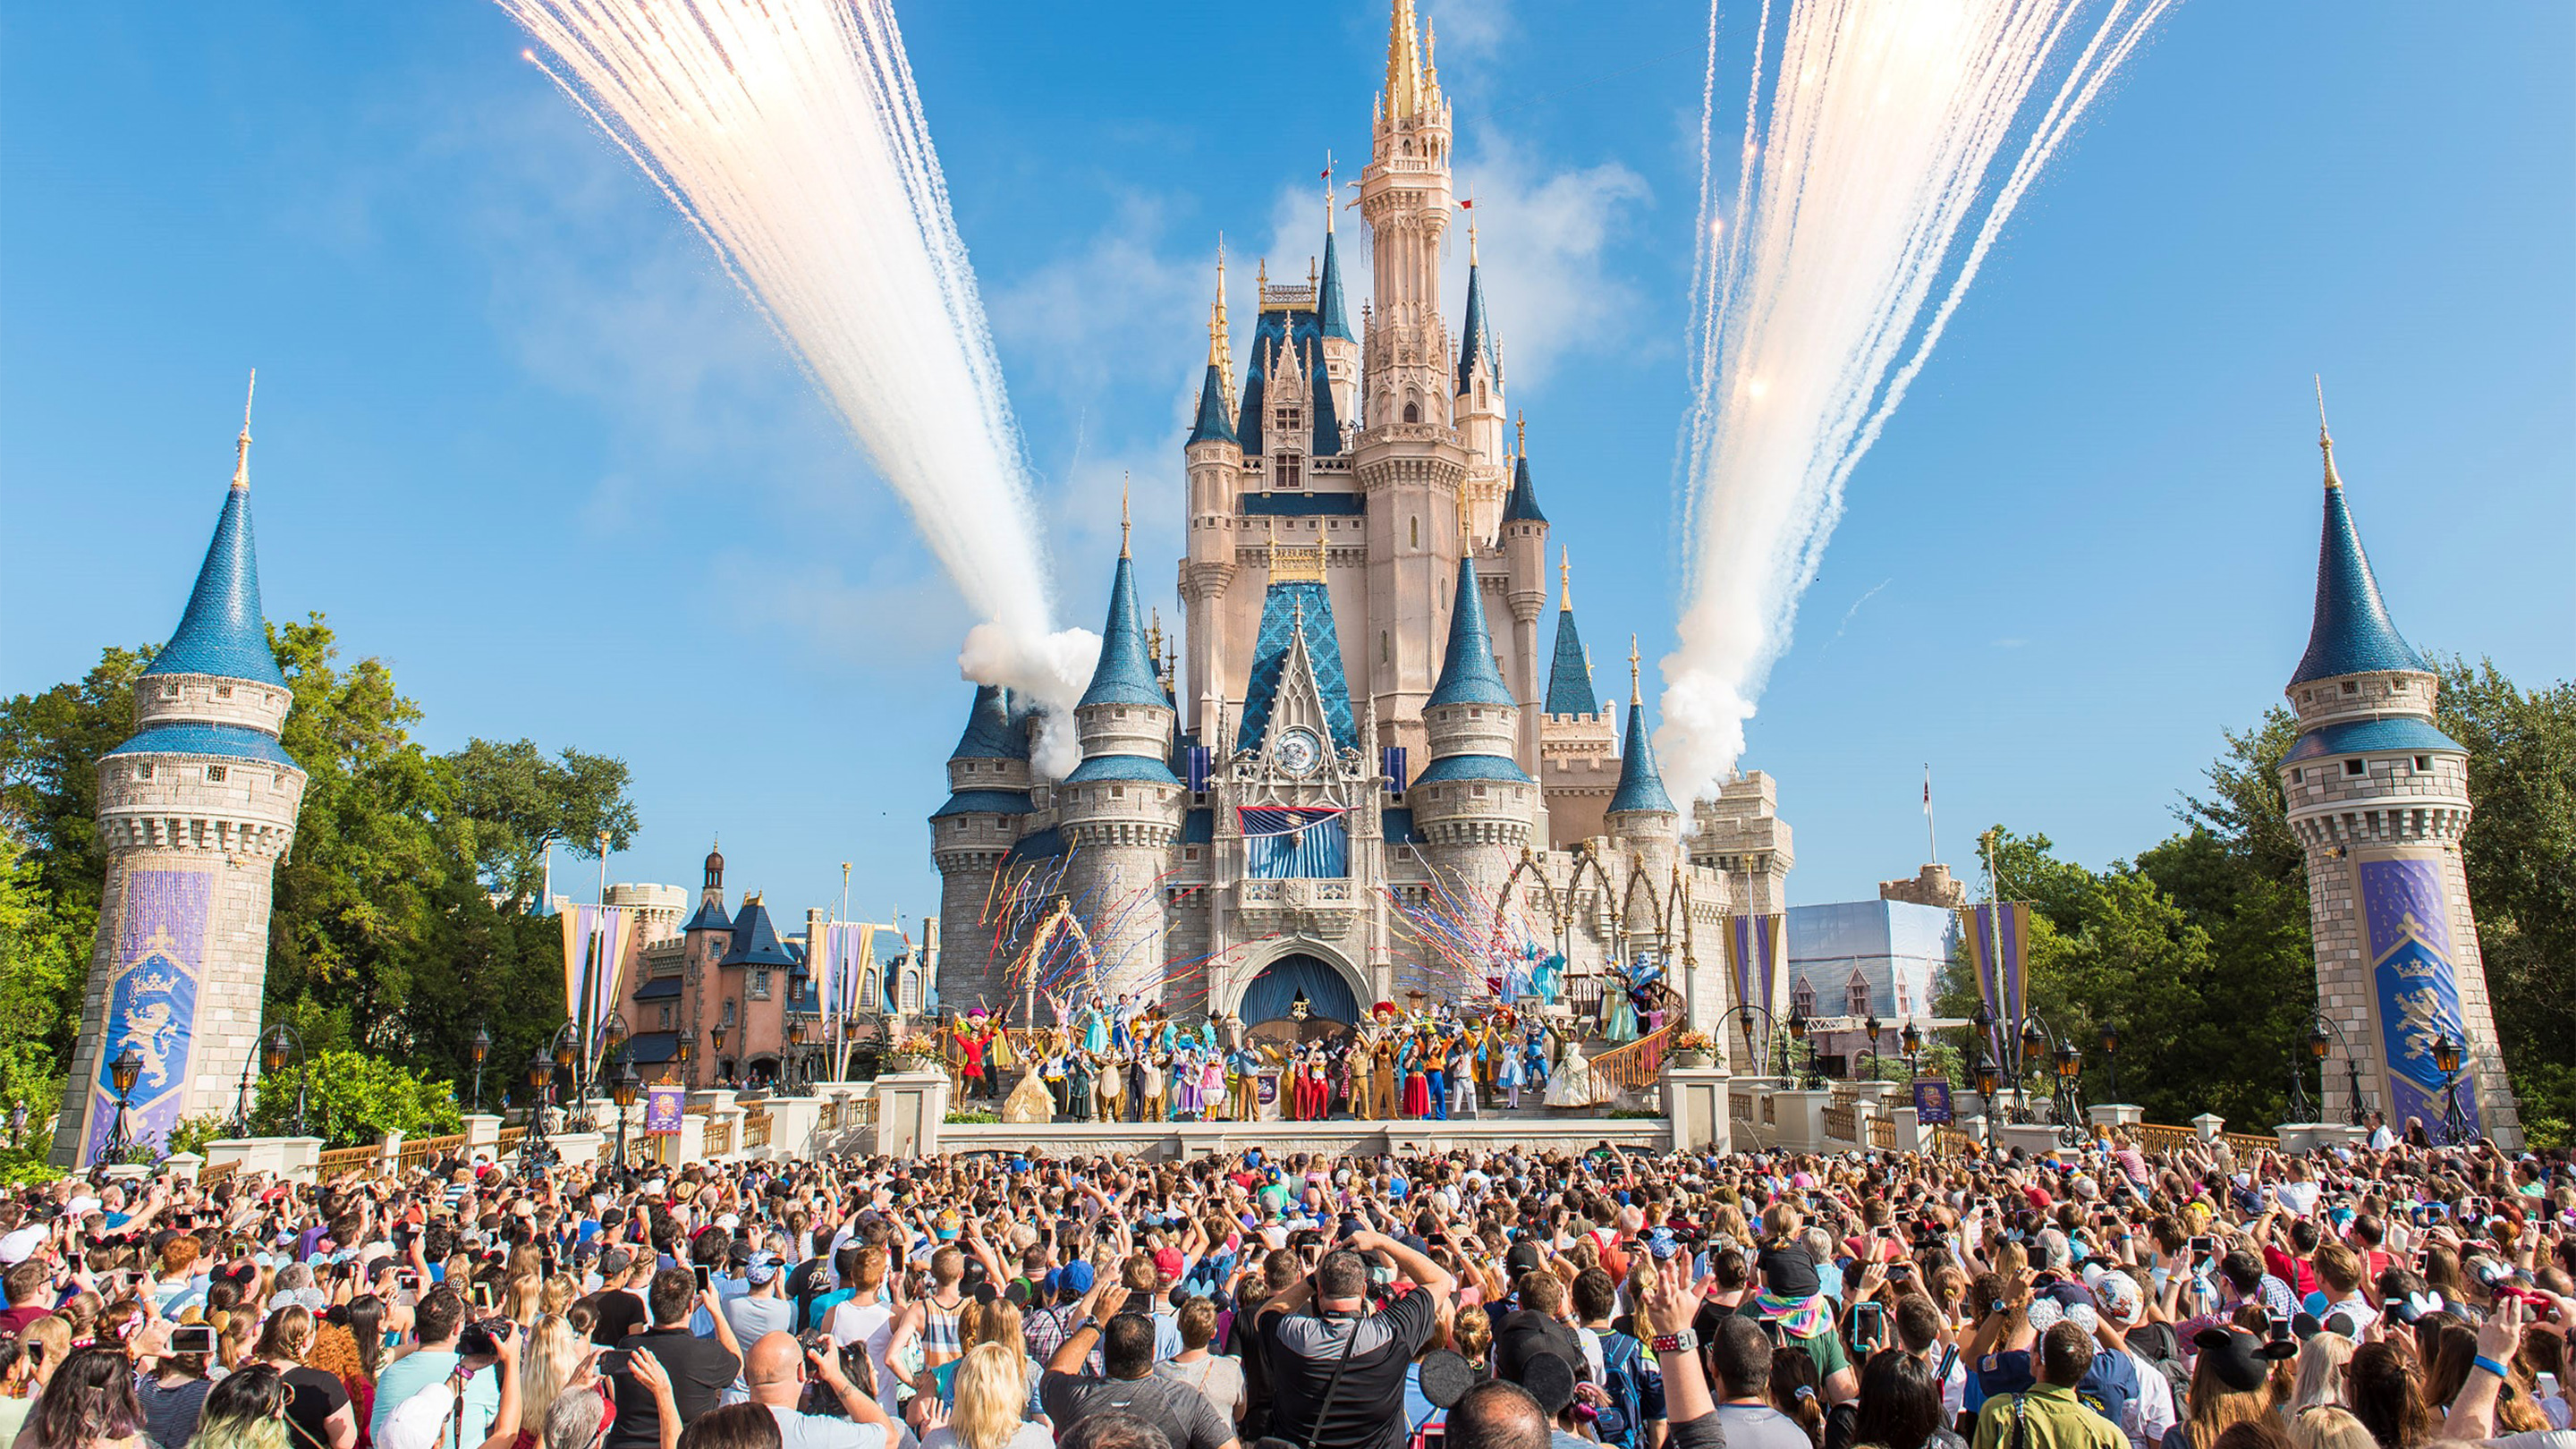 Why Disney Wants To Reopen Its Theme Parks During A Pandemic